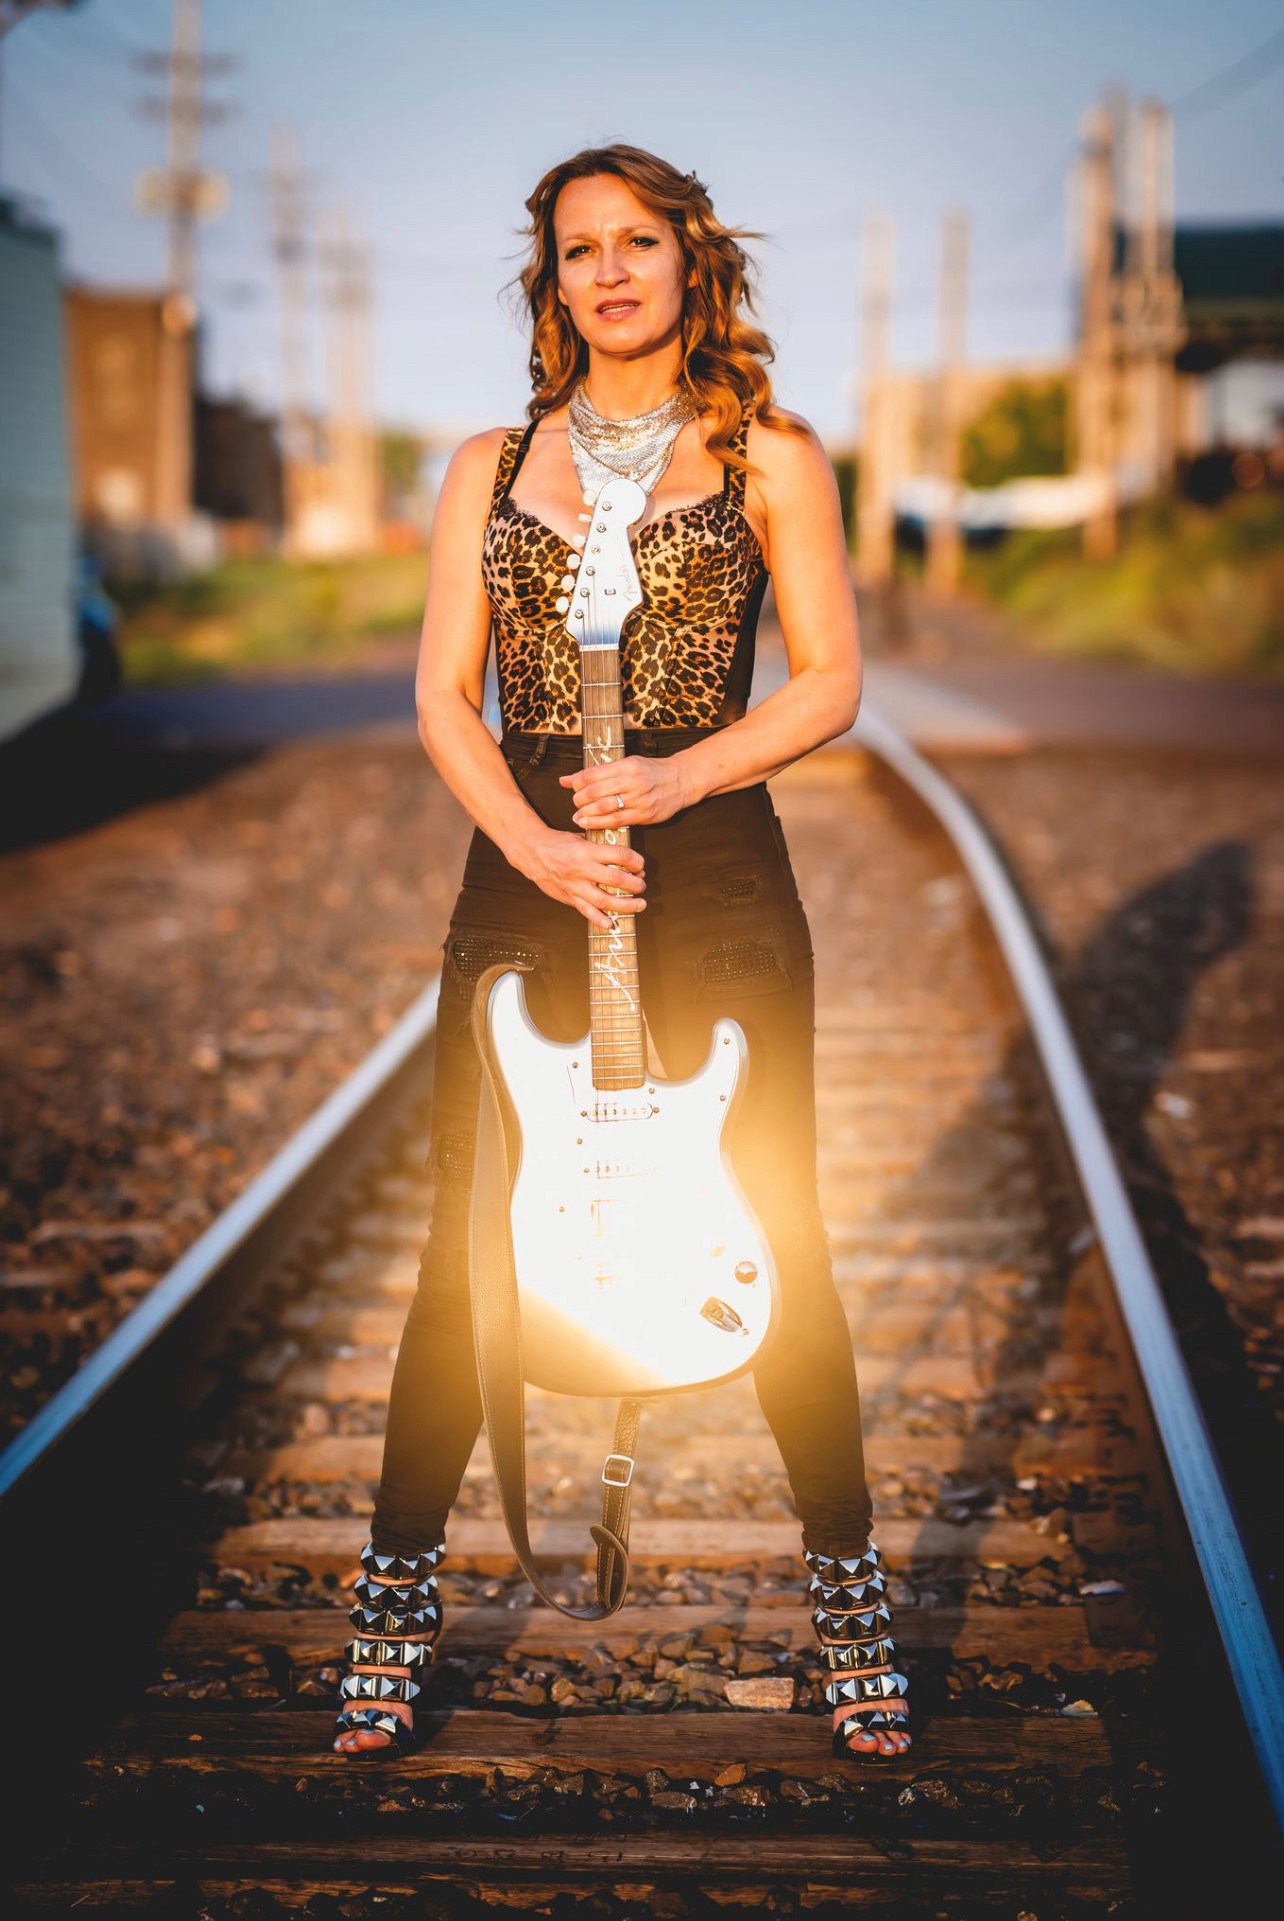 Ana Popovic on the introduction of her custom Fender Stratocaster “Foggy” | “Factual then, we knew this guitar was going to be EPIC!”